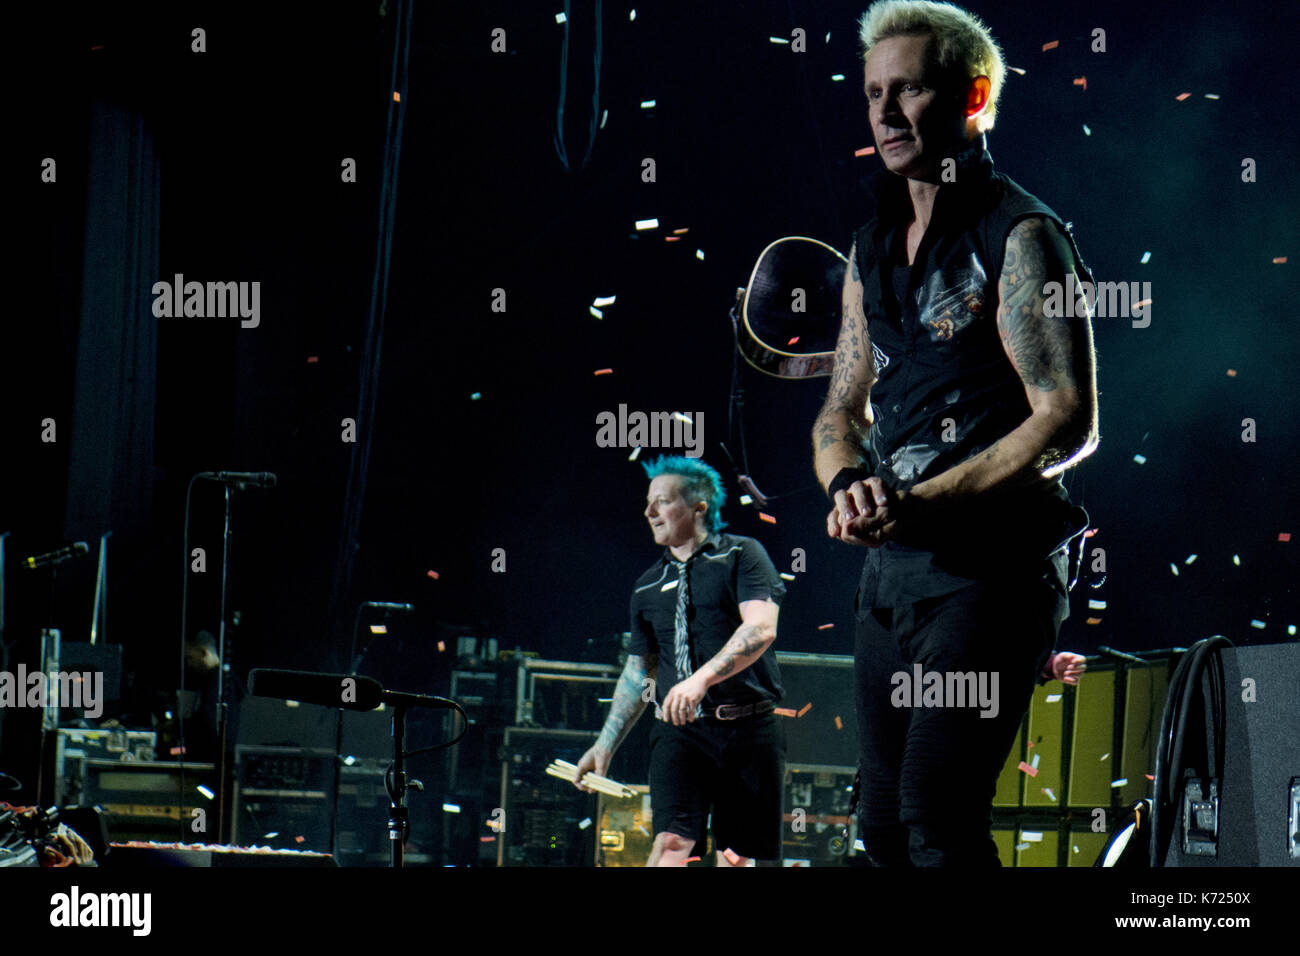 Chula Vista, CA, USA. 13th Sep, 2017. Drummer Tré Cool, left, and bassist Mike Dirnt of the rock band Green Day performs greet the crowd during a concert as part of their Revolution Radio Tour on Sept. 13, 2017. Credit: KC Alfred/ZUMA Wire/Alamy Live News Stock Photo